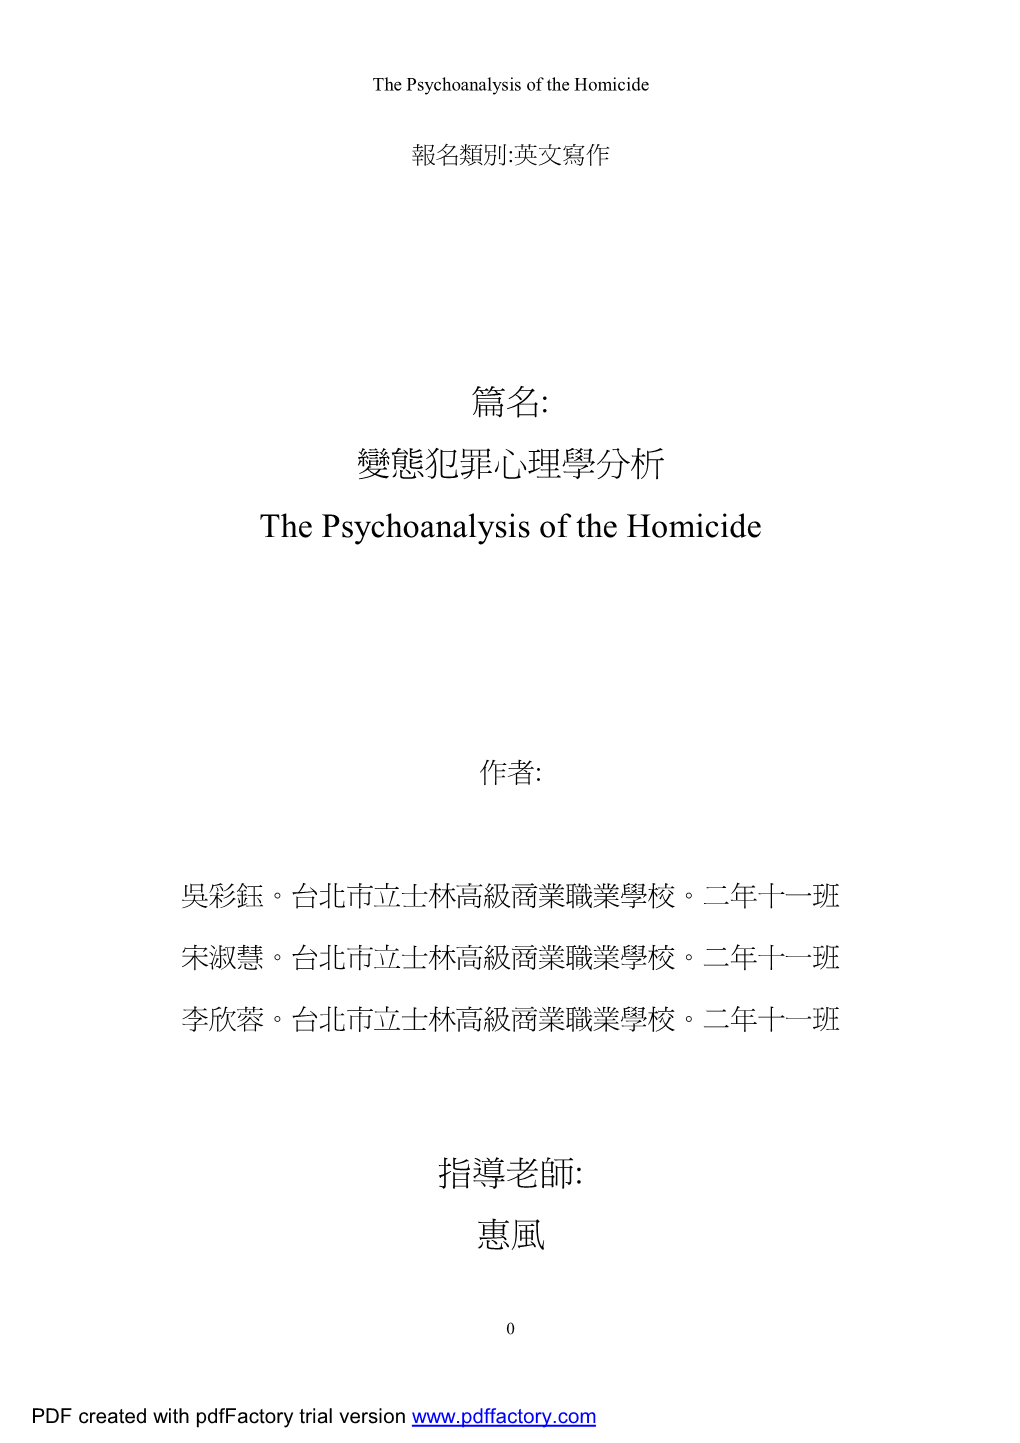 The Psychoanalysis of the Homicide